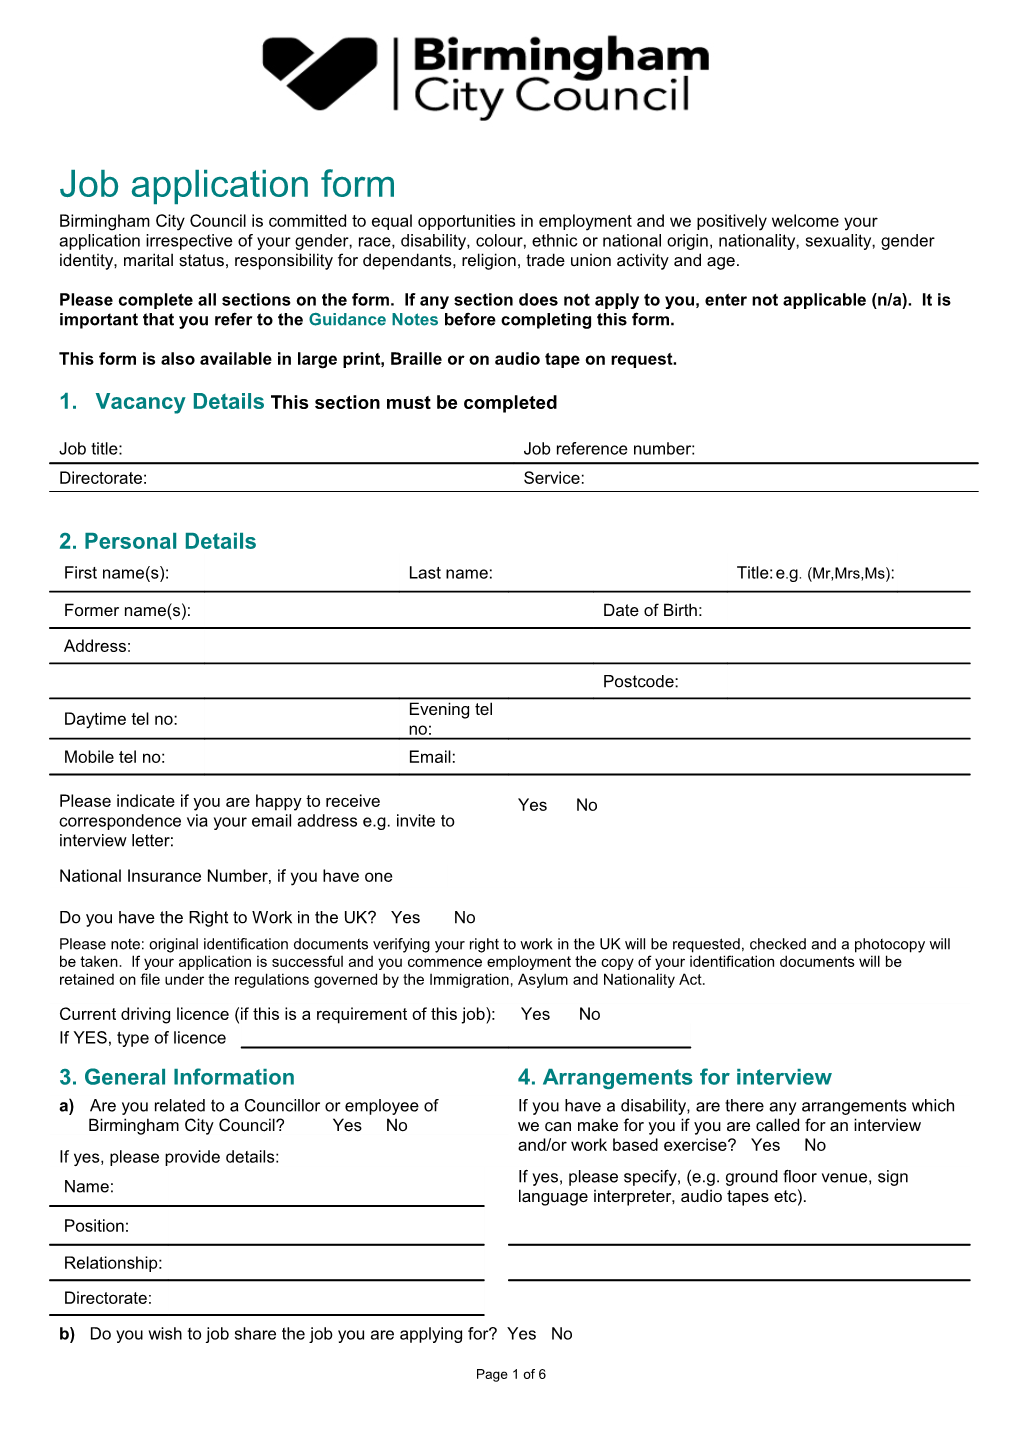 This Form Is Also Available in Large Print, Braille Or on Audio Tape on Request